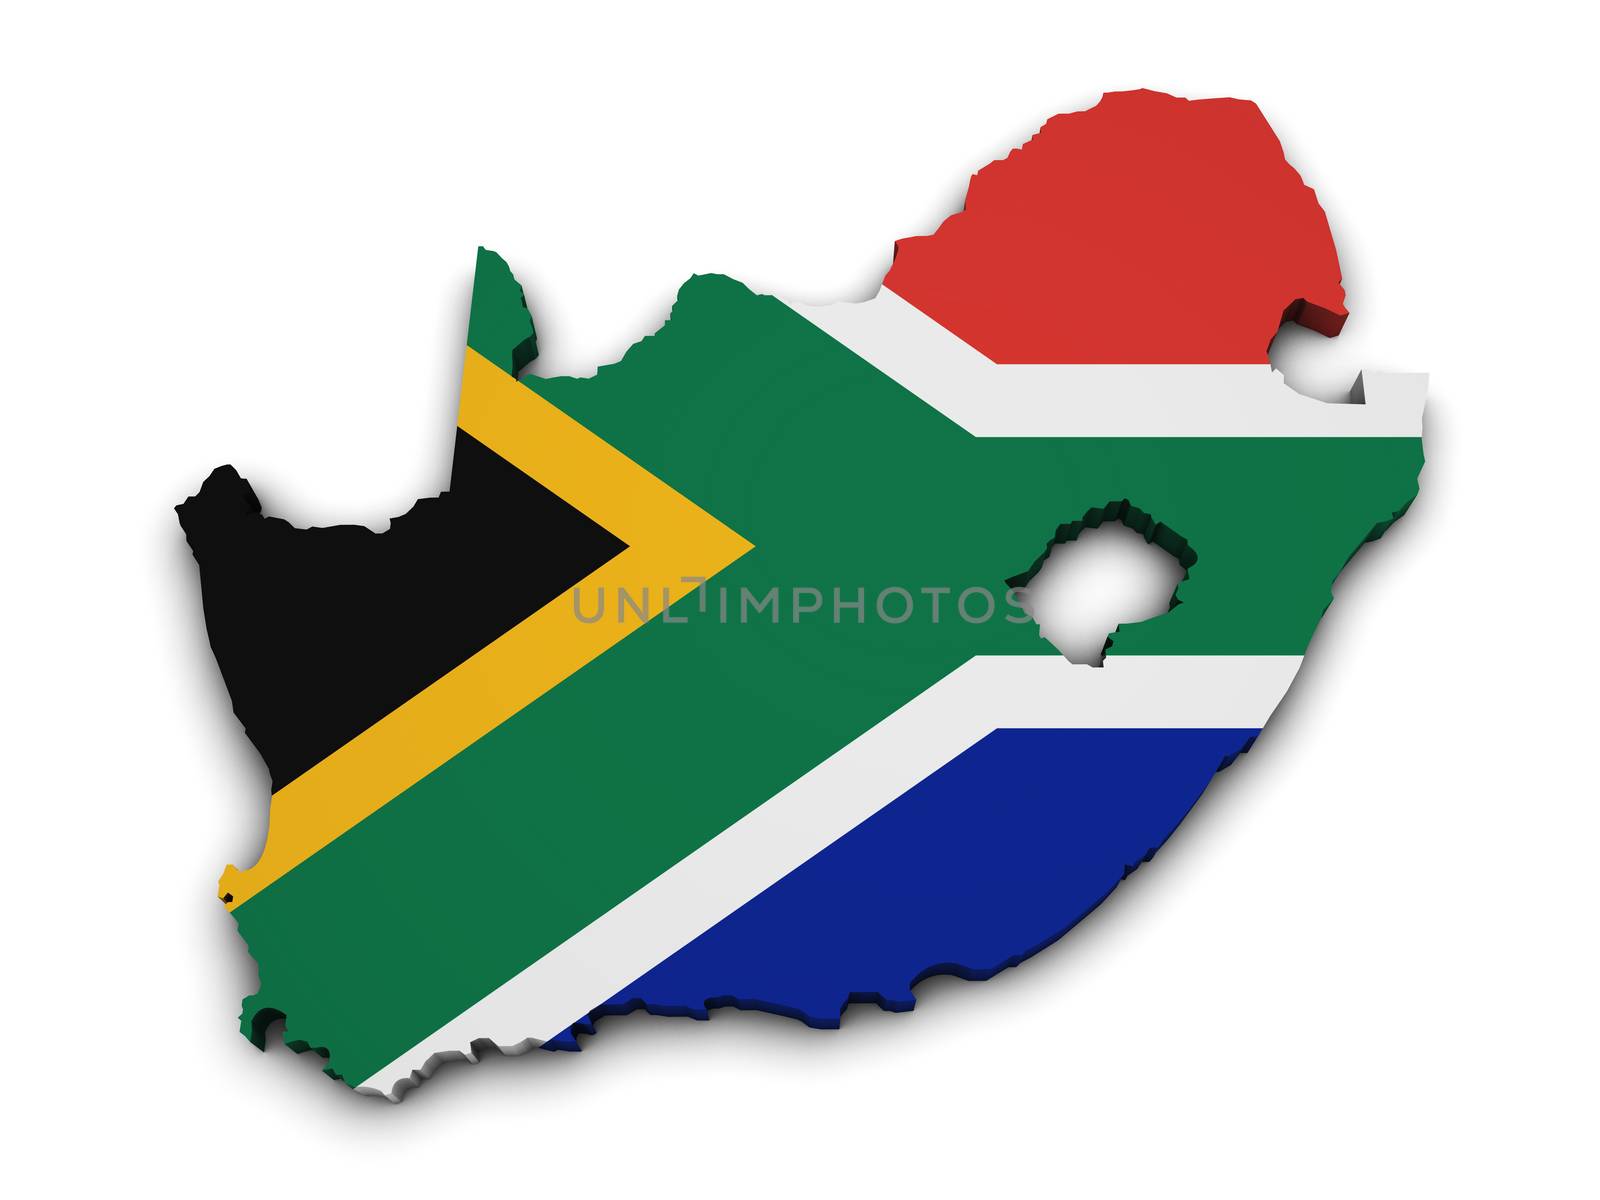 Shape 3d of South Africa map with flag isolated on white background.